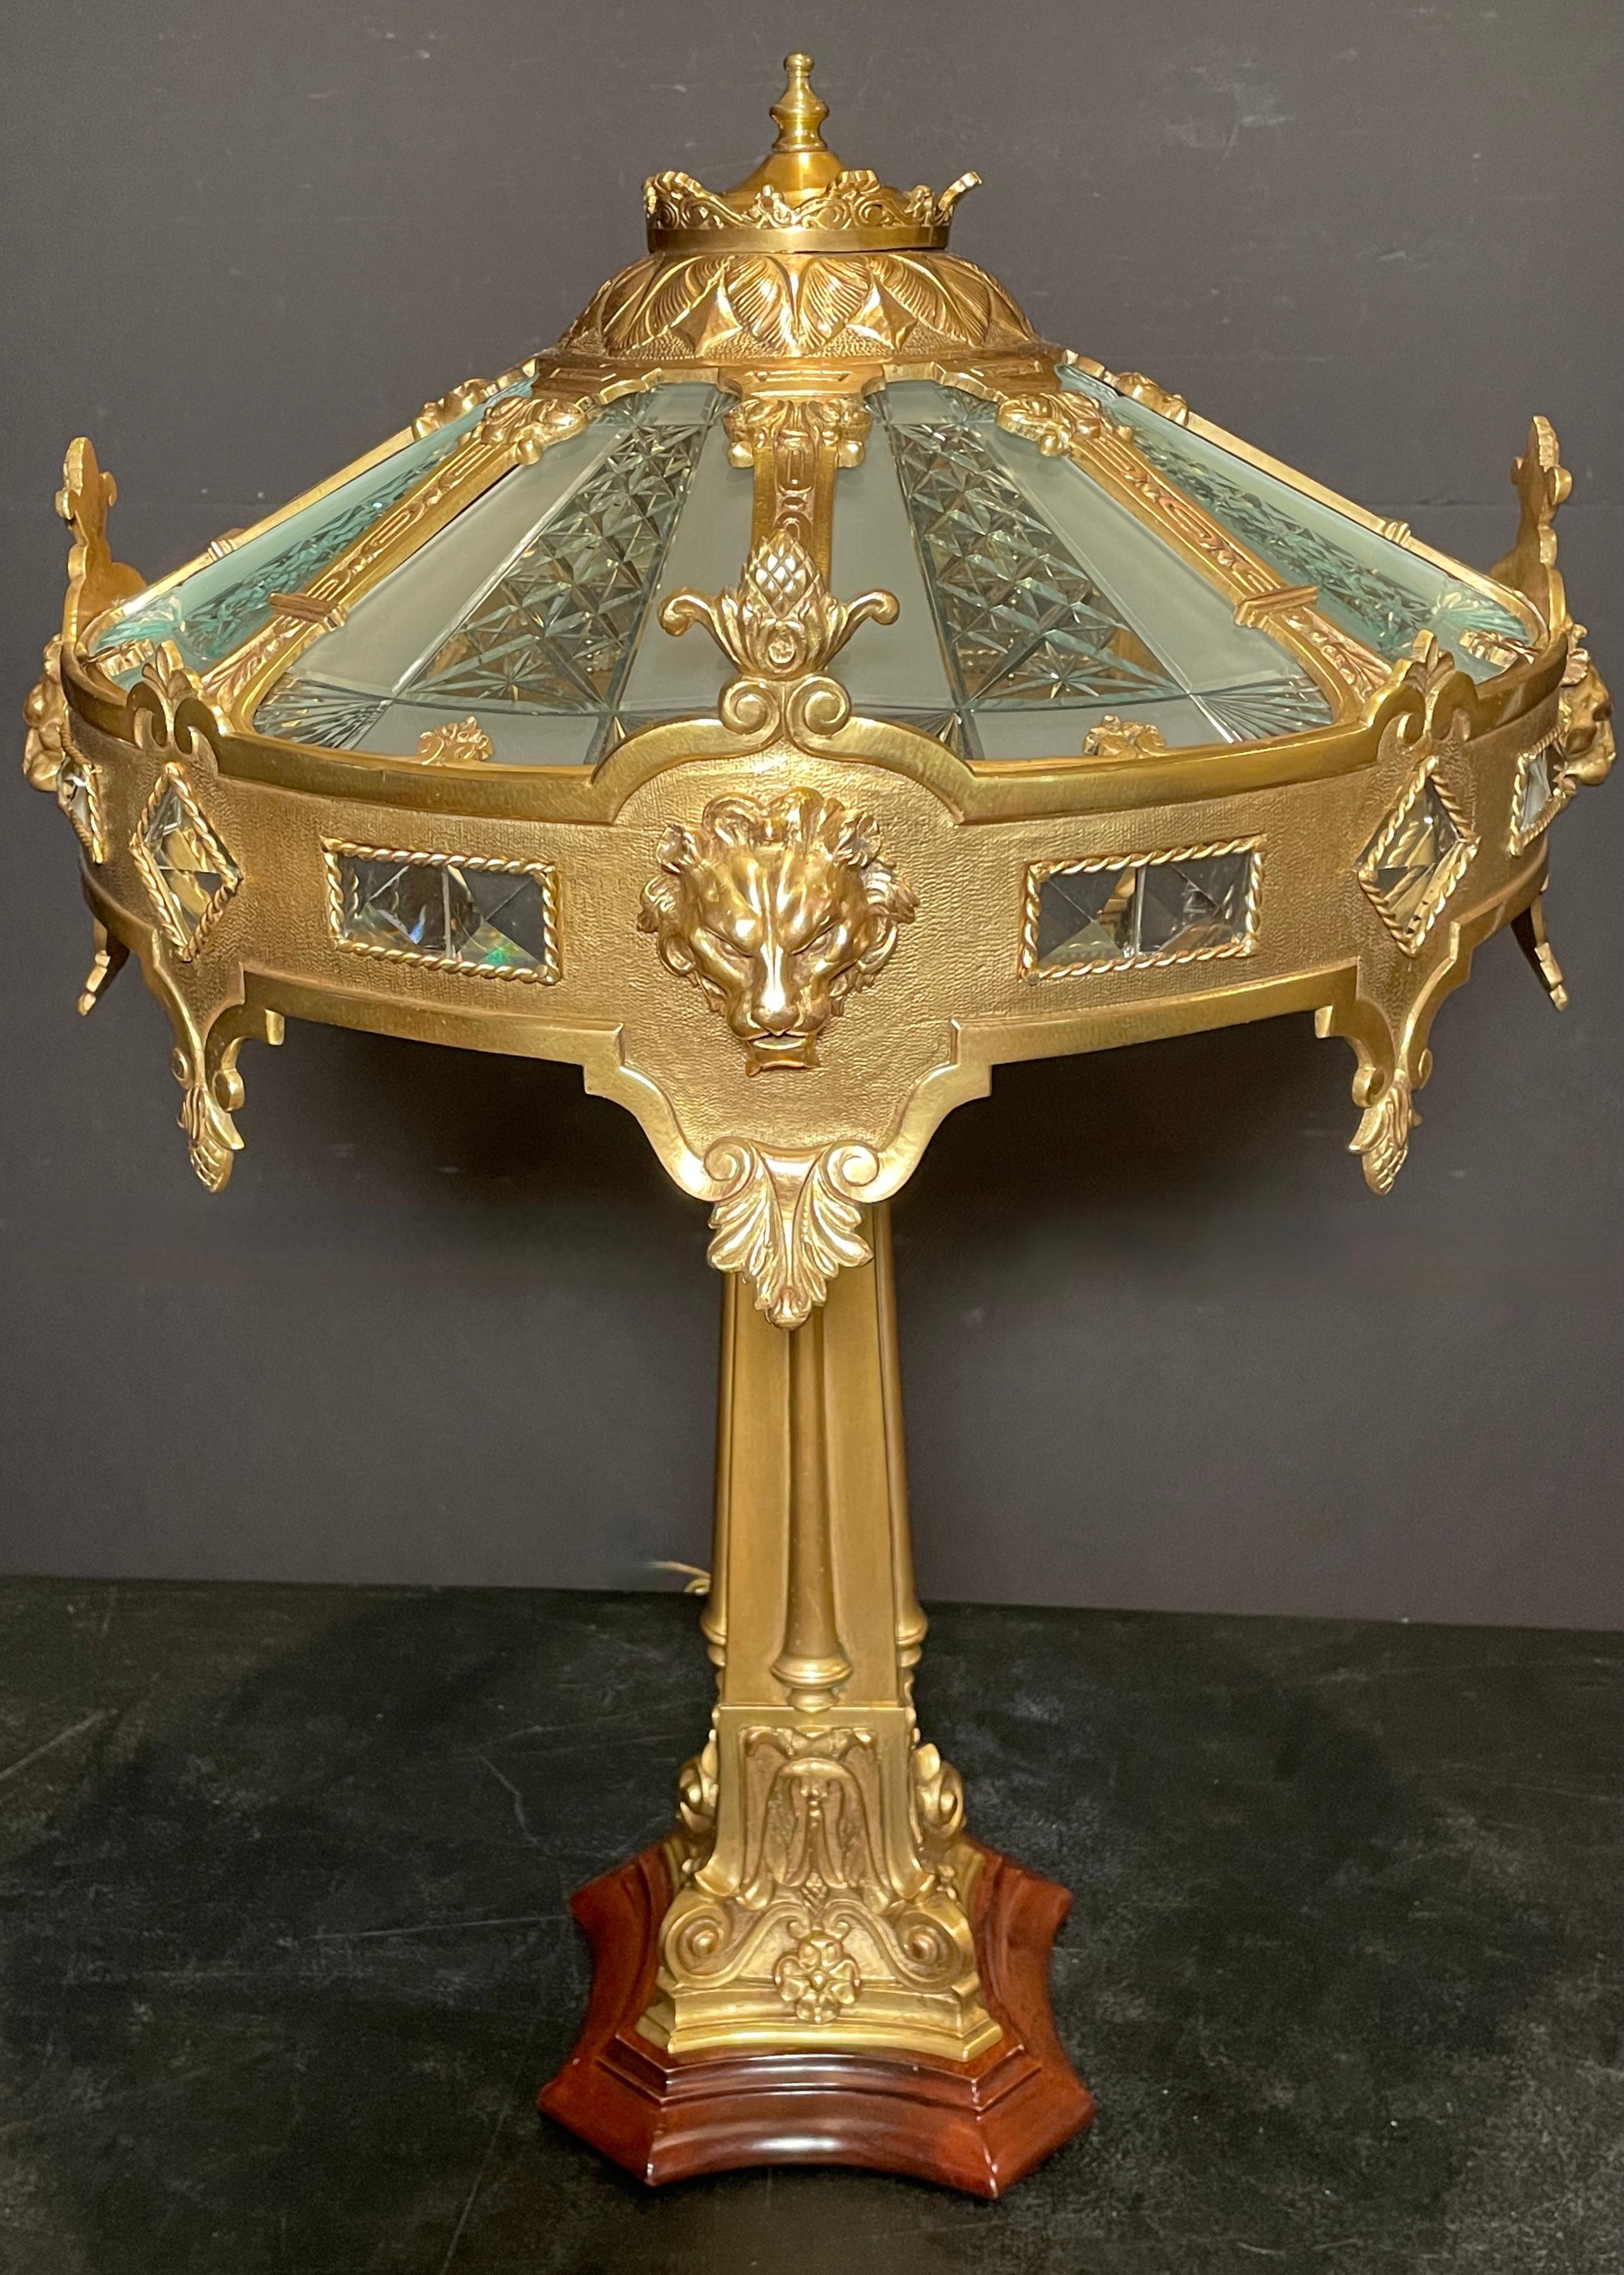 Caldwell bronze lamp base and shade with wheel cut glass panels. Lion mask mounts with crystal jewel inserts. Clean neoclassical lines define this lamp. Bronze column ending in a mahogany base.